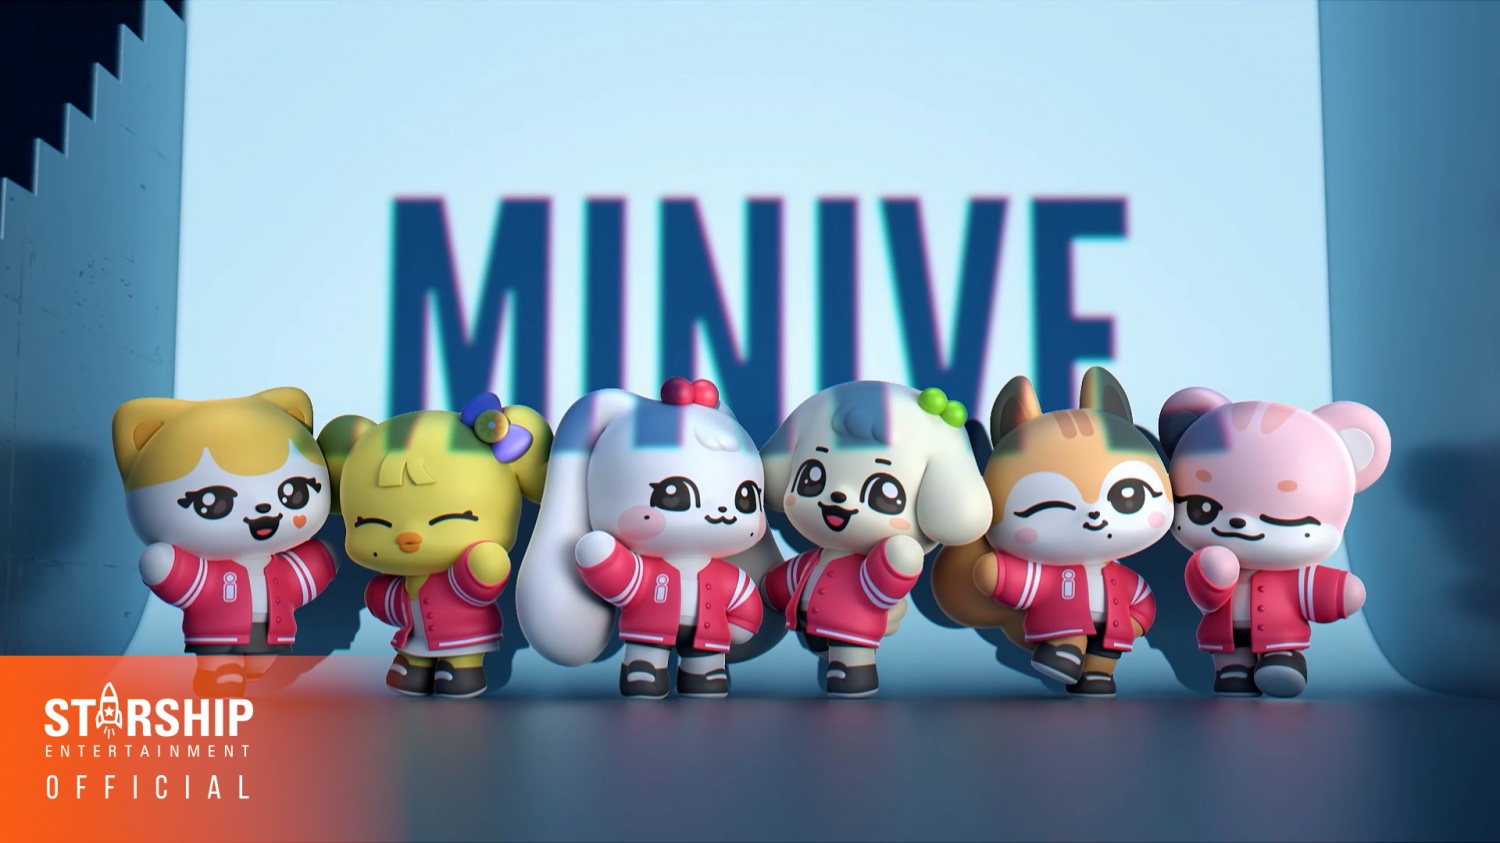 IVE, official character MINIVE revealed… Resembles the members, 'cute'